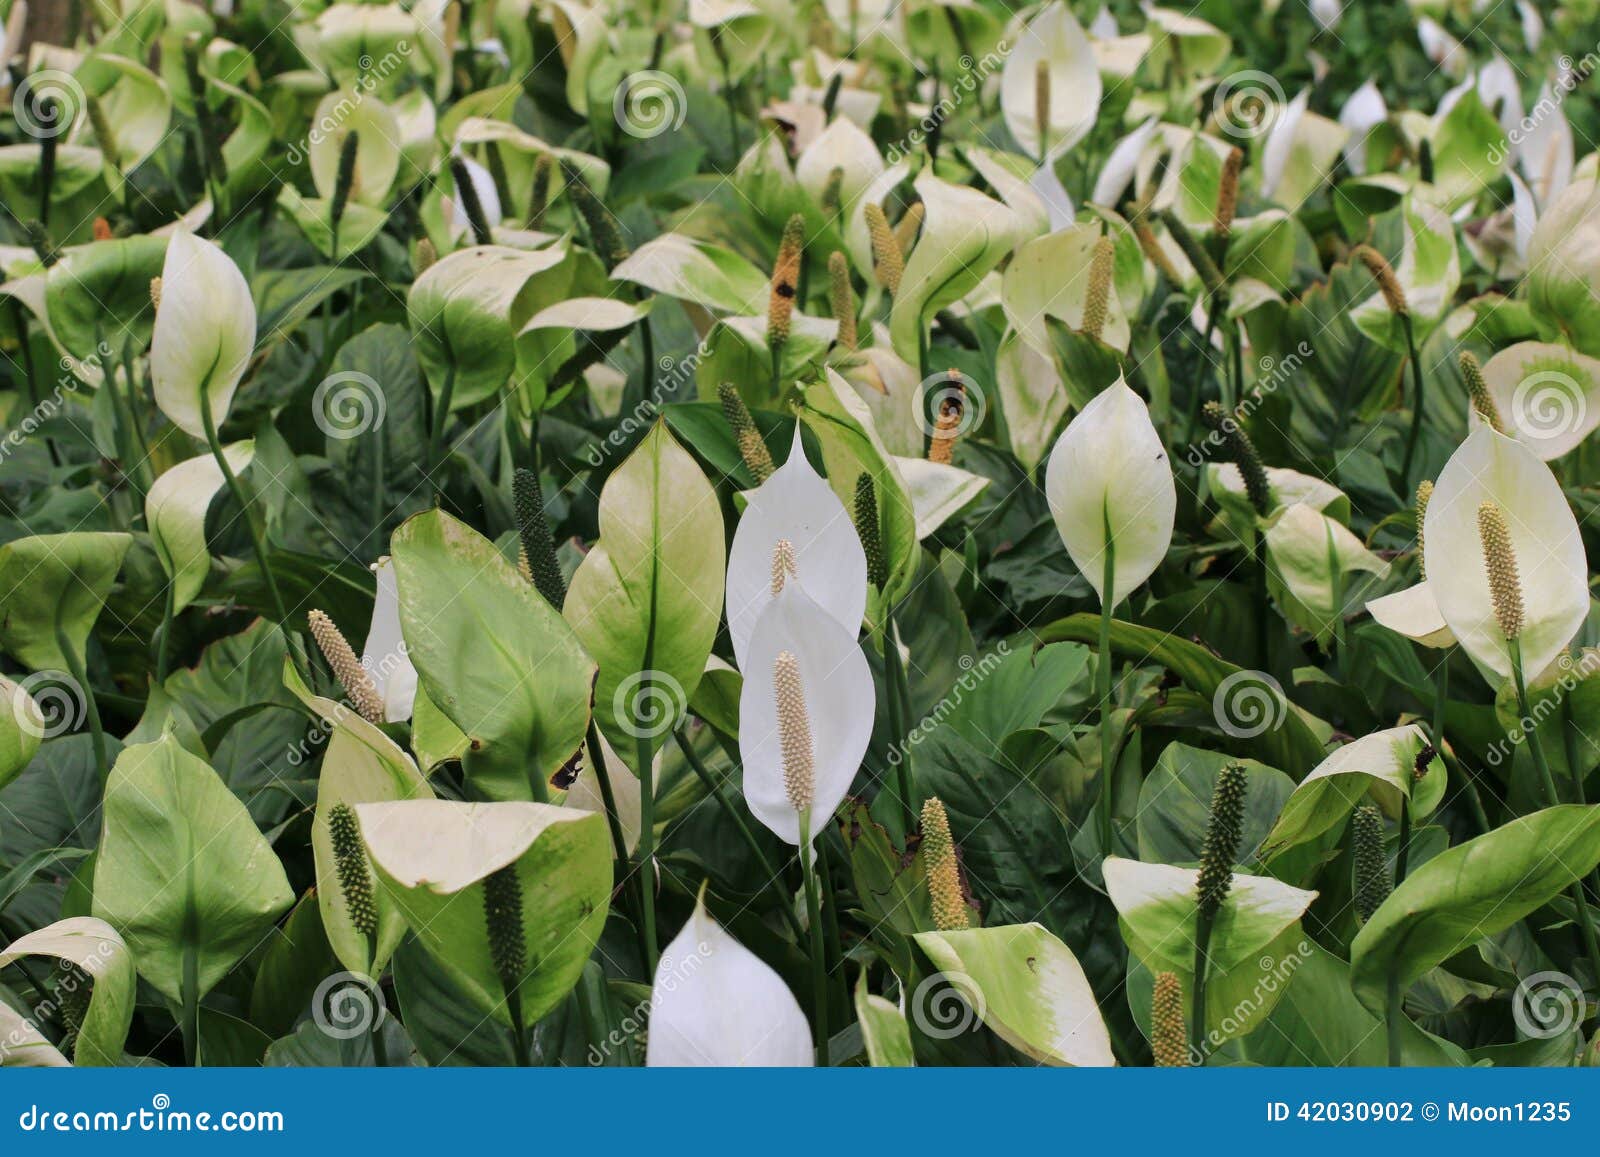 peace lilies blooming in the garden, peace lily, sail plant, spathe flower